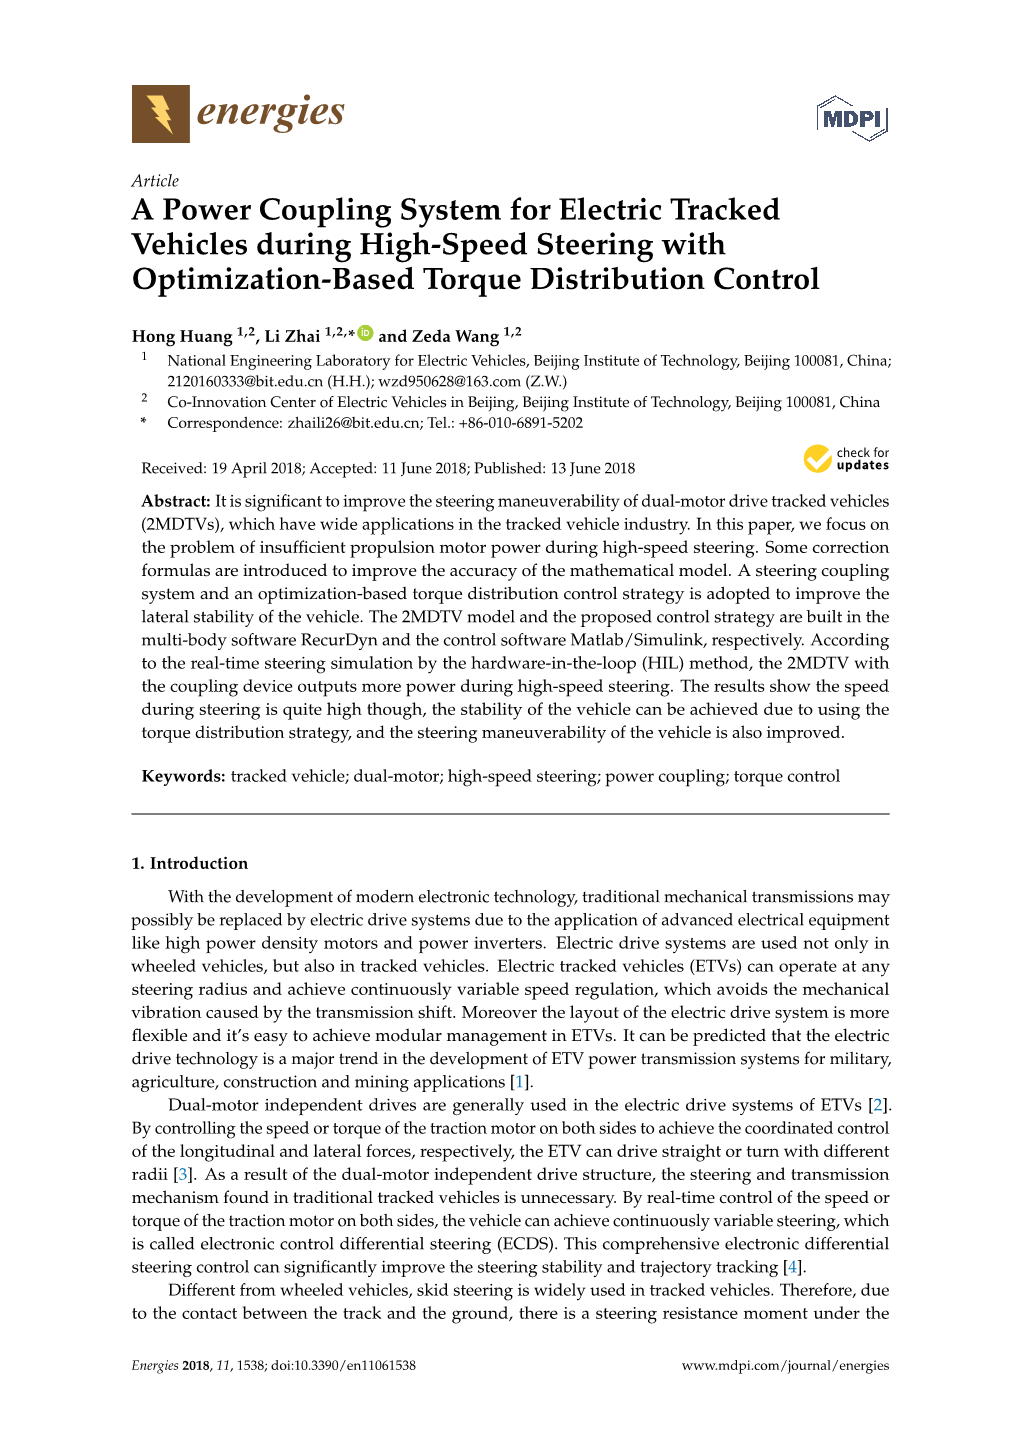 A Power Coupling System for Electric Tracked Vehicles During High-Speed Steering with Optimization-Based Torque Distribution Control